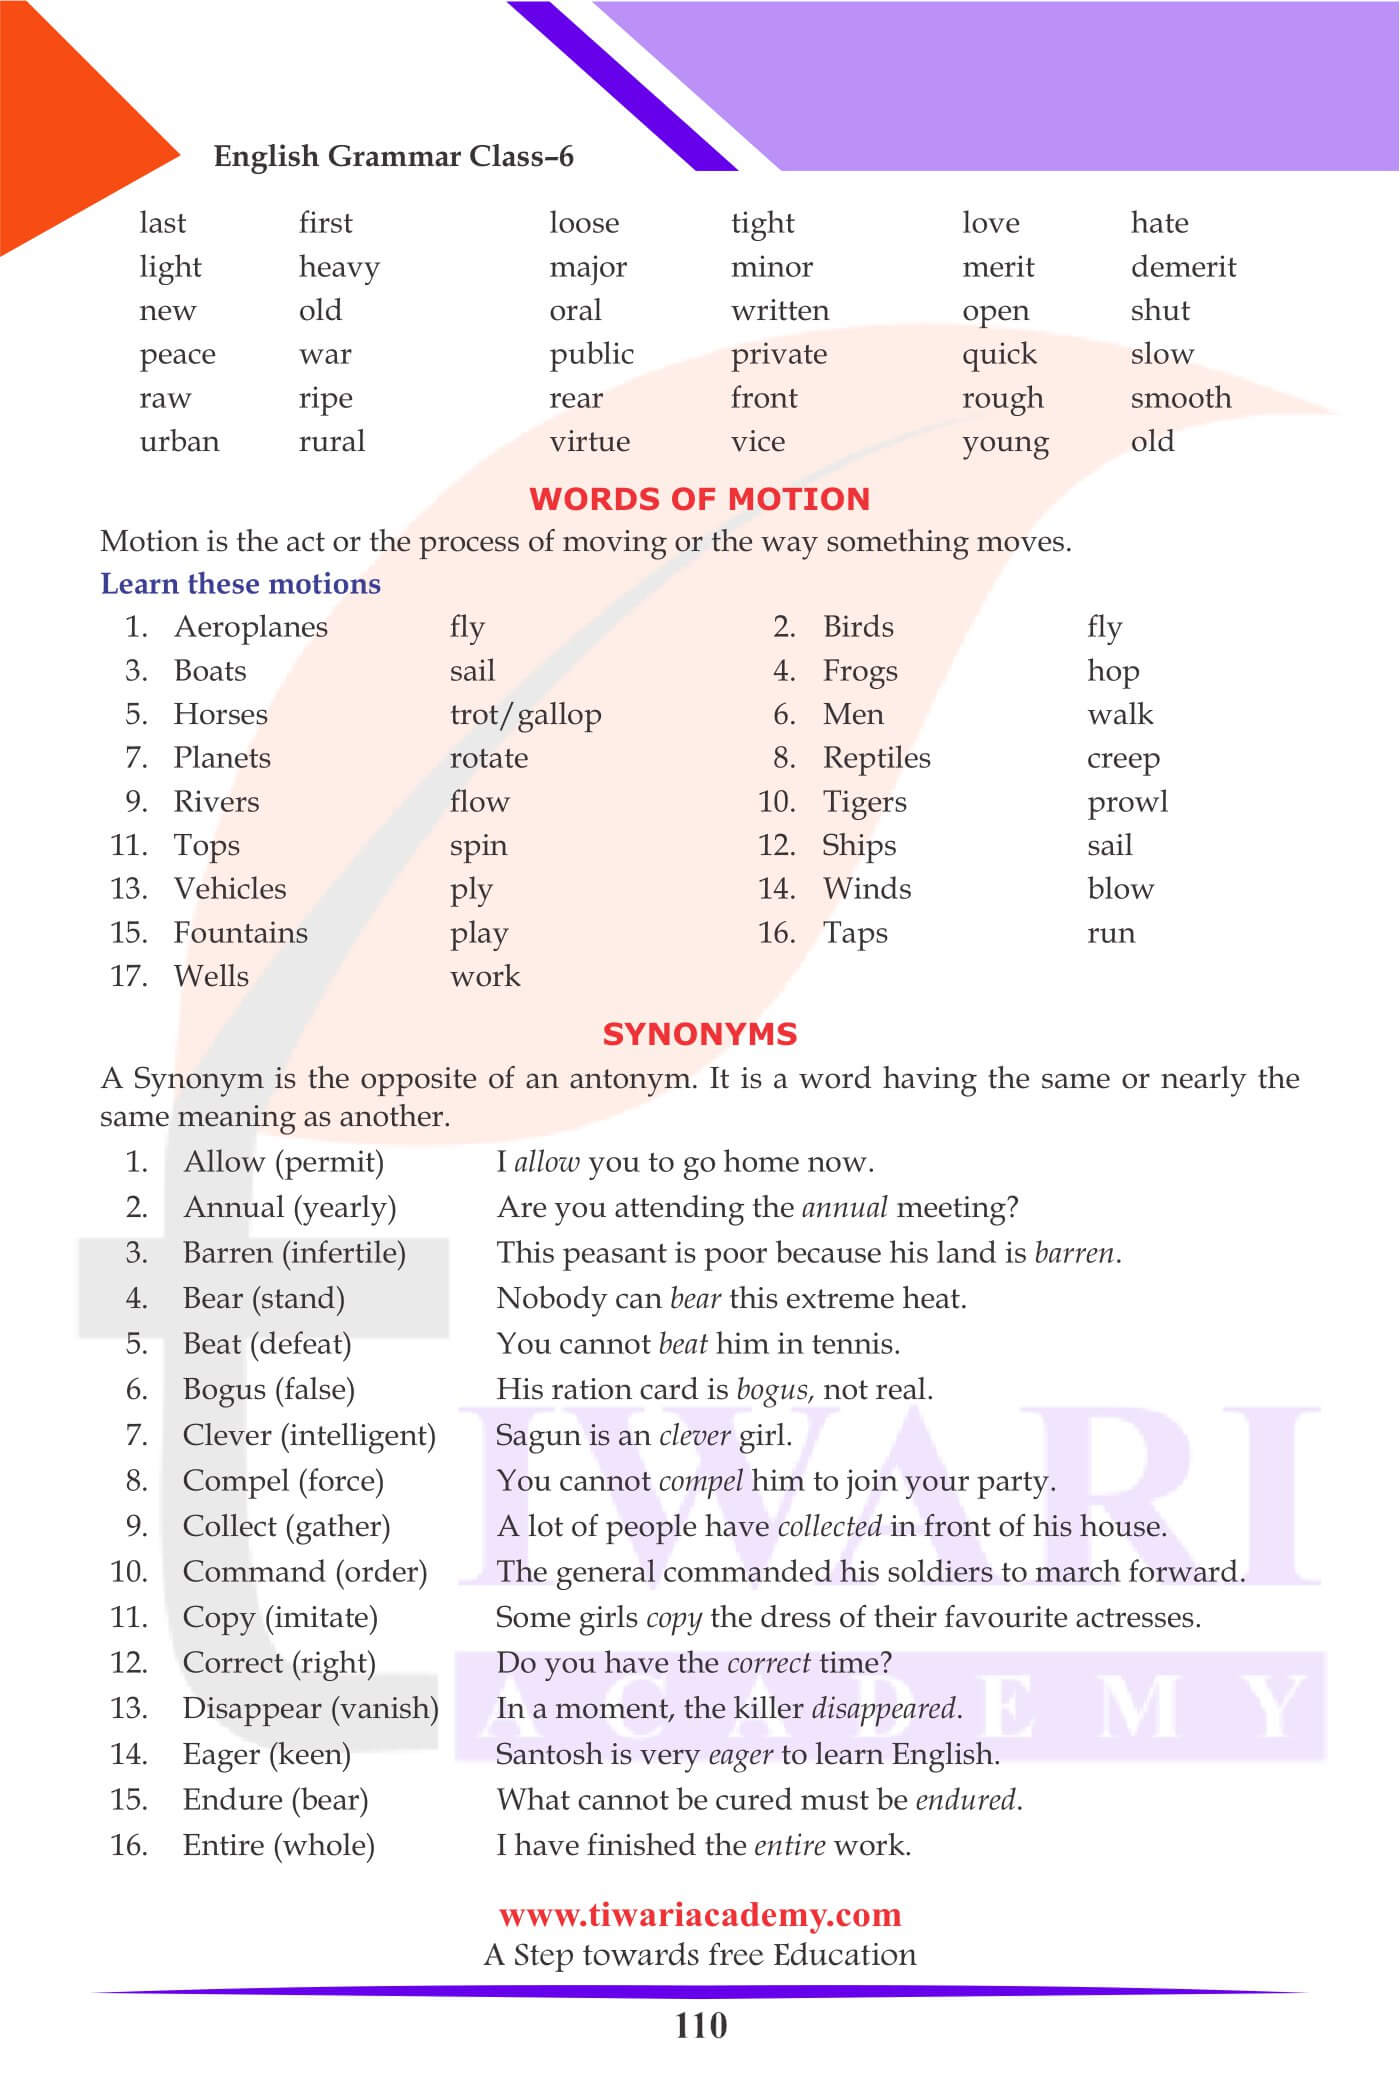 Class 6 English Grammar Vocabulary and Word Power study material